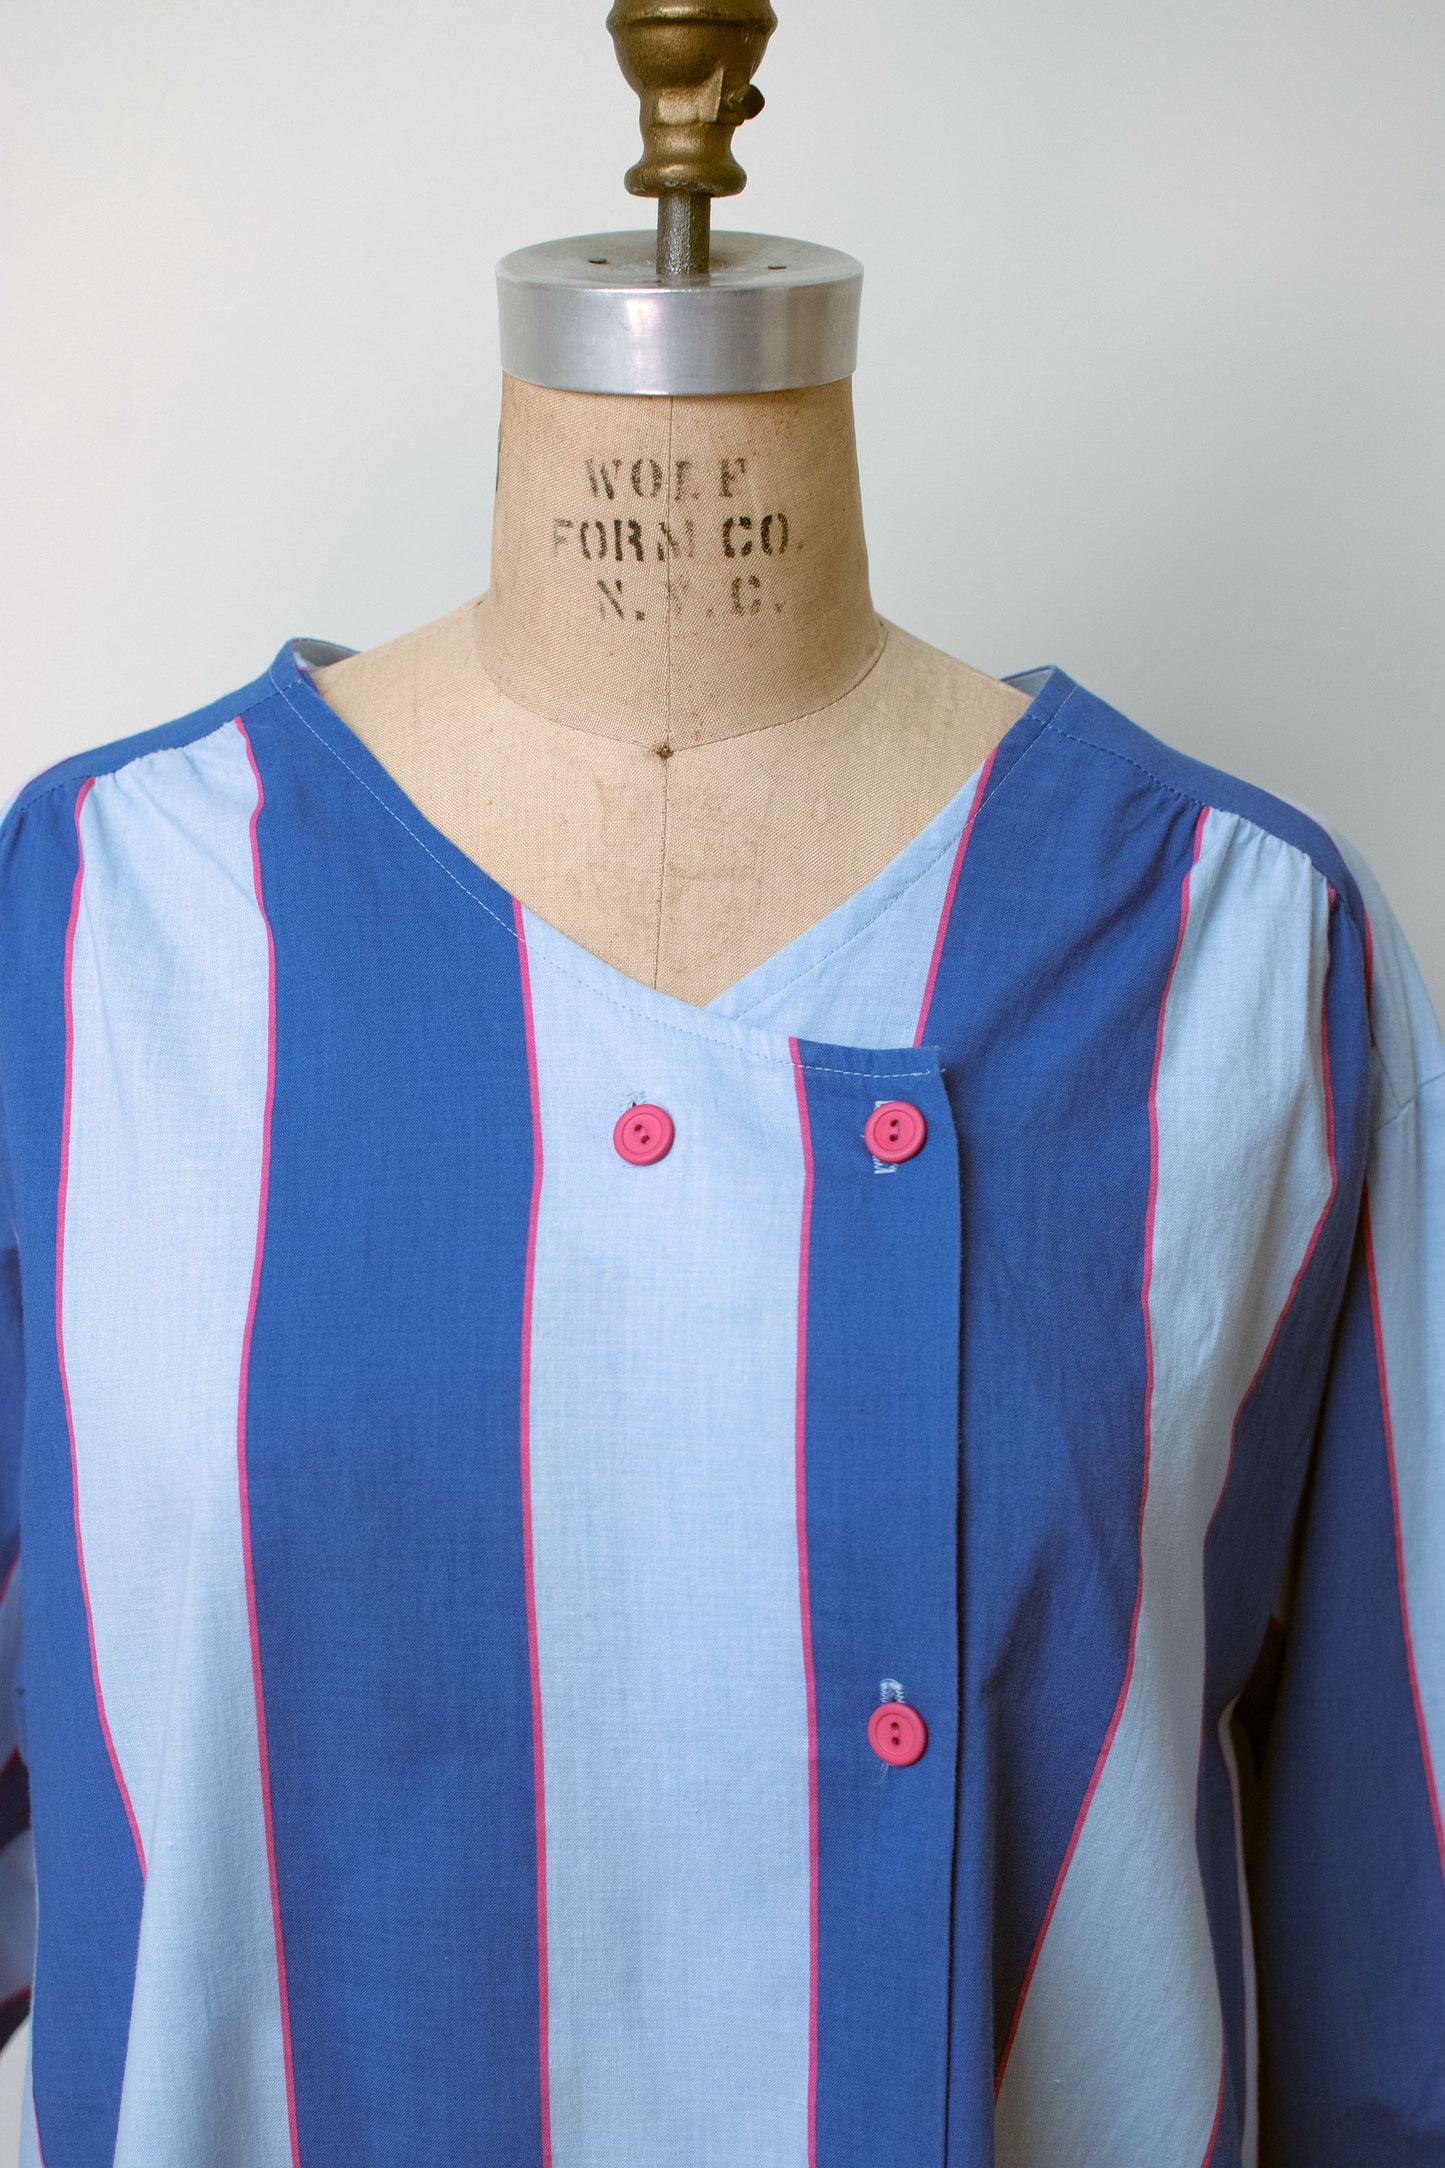 1980s Blue Striped Smock Top